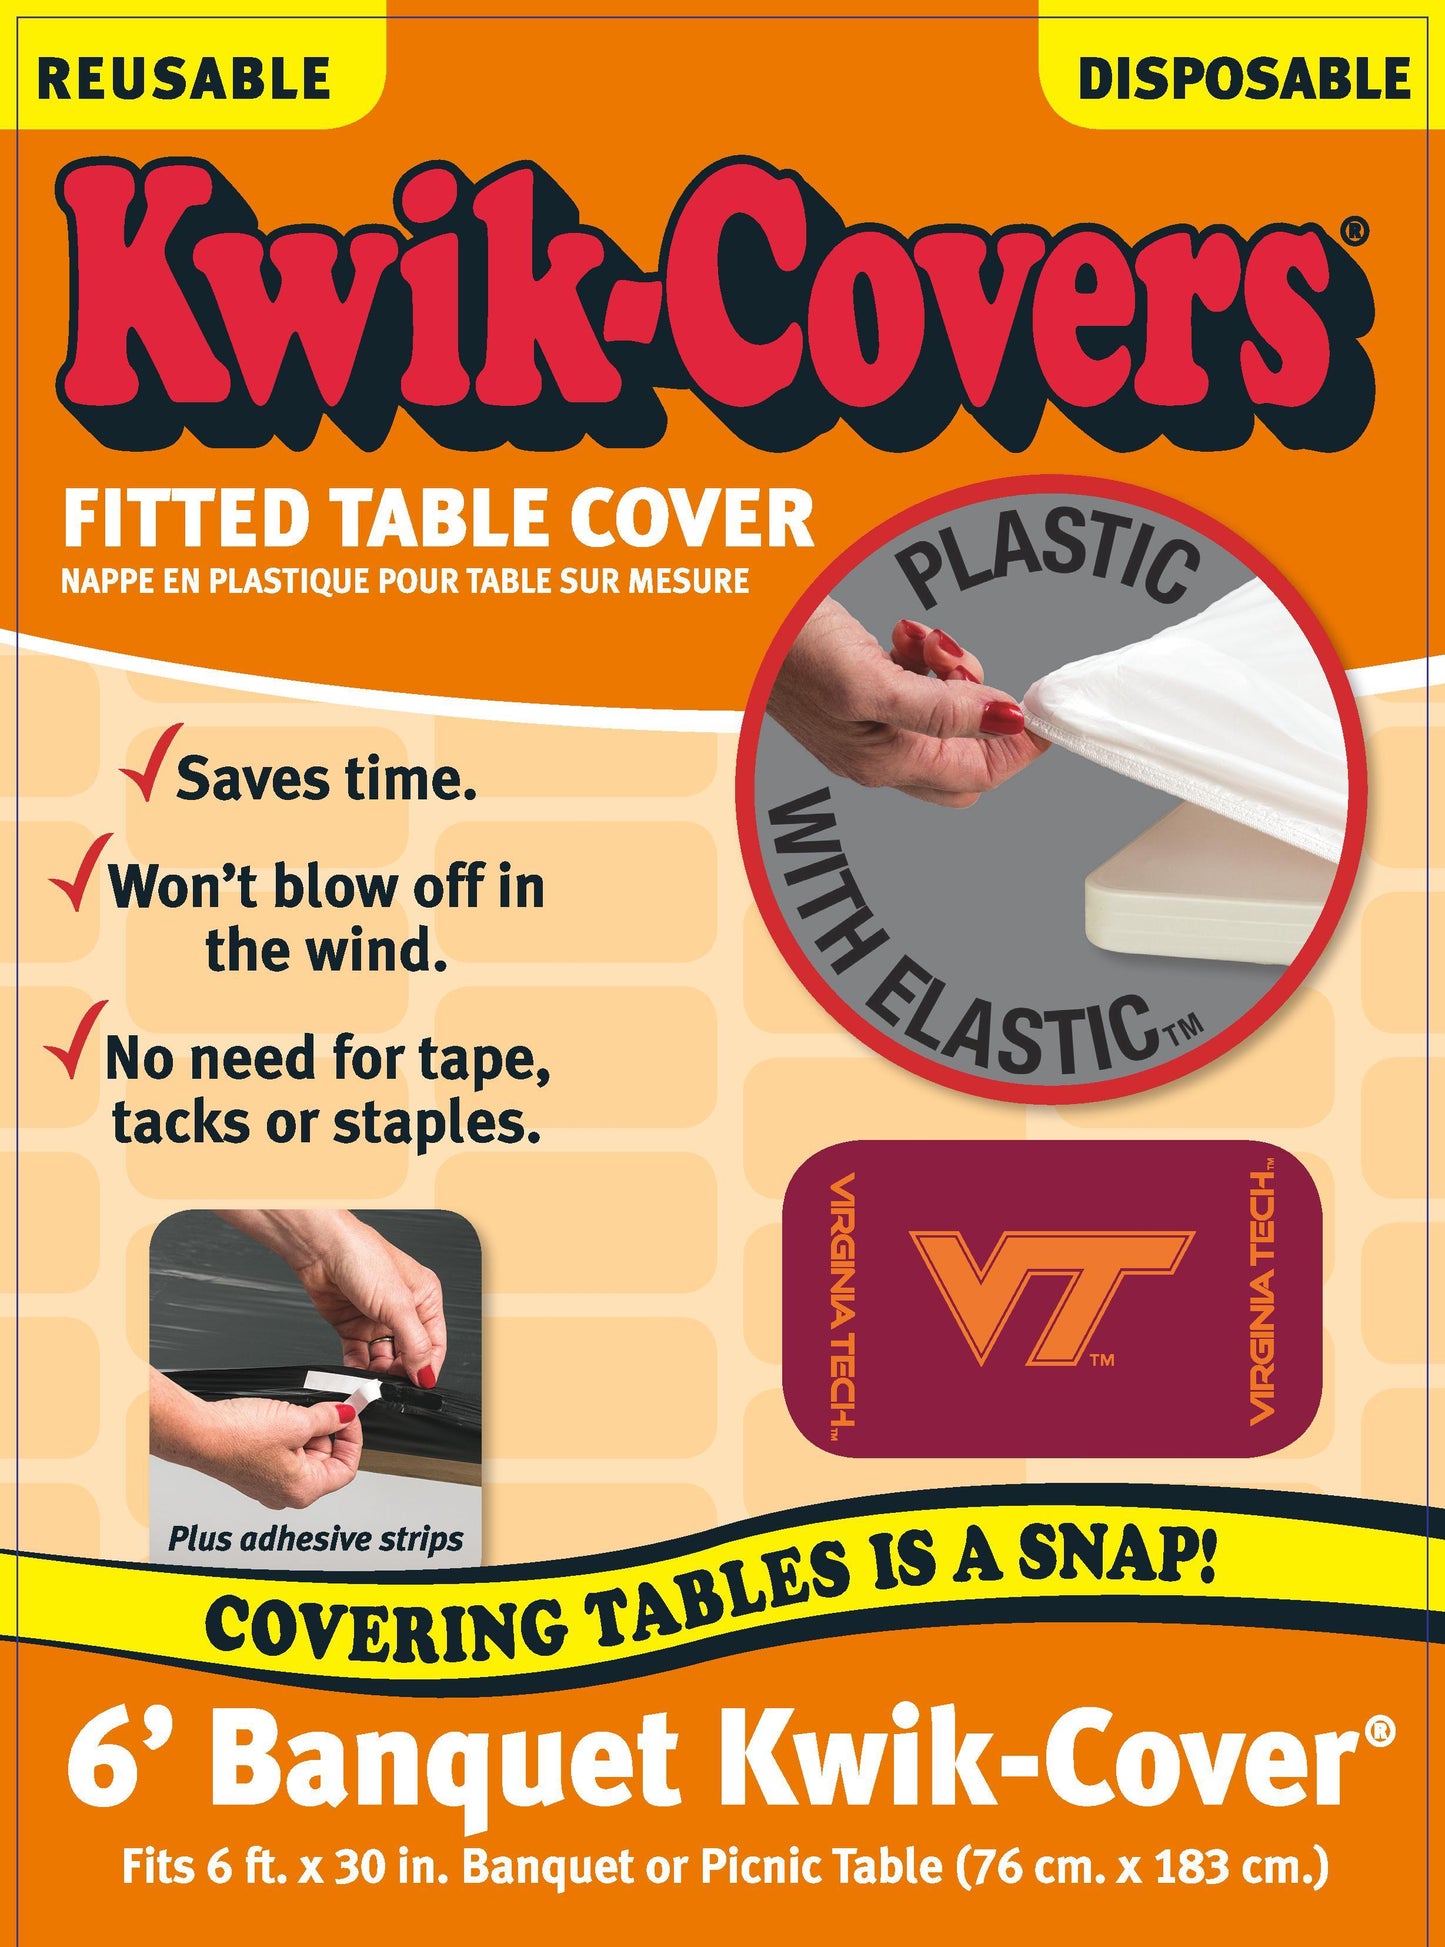 Collegiate Kwik-Covers Rectangle Plastic Table Cover (Virginia Polytechnic Institute and State University)